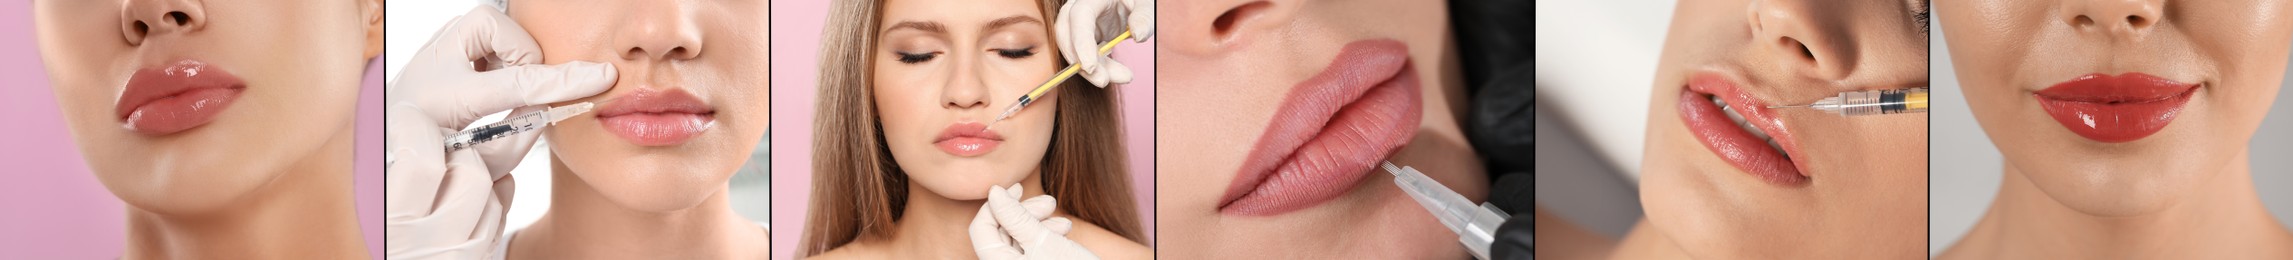 Collage with photos of women during procedures of lip augmentation and permanent makeup, closeup. Banner design